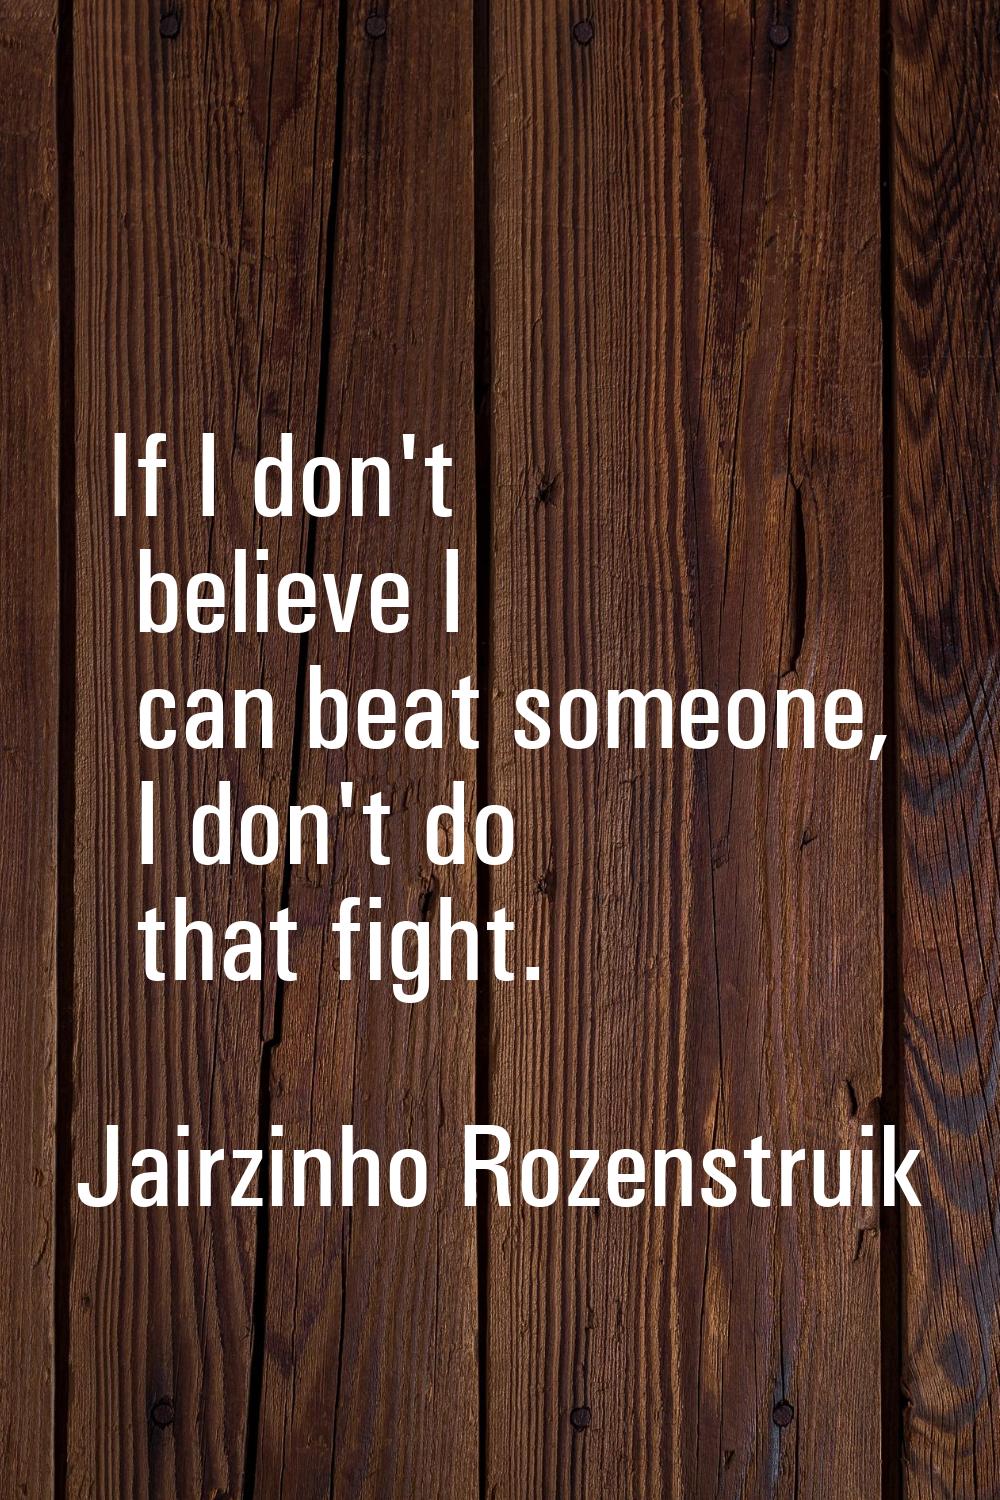 If I don't believe I can beat someone, I don't do that fight.